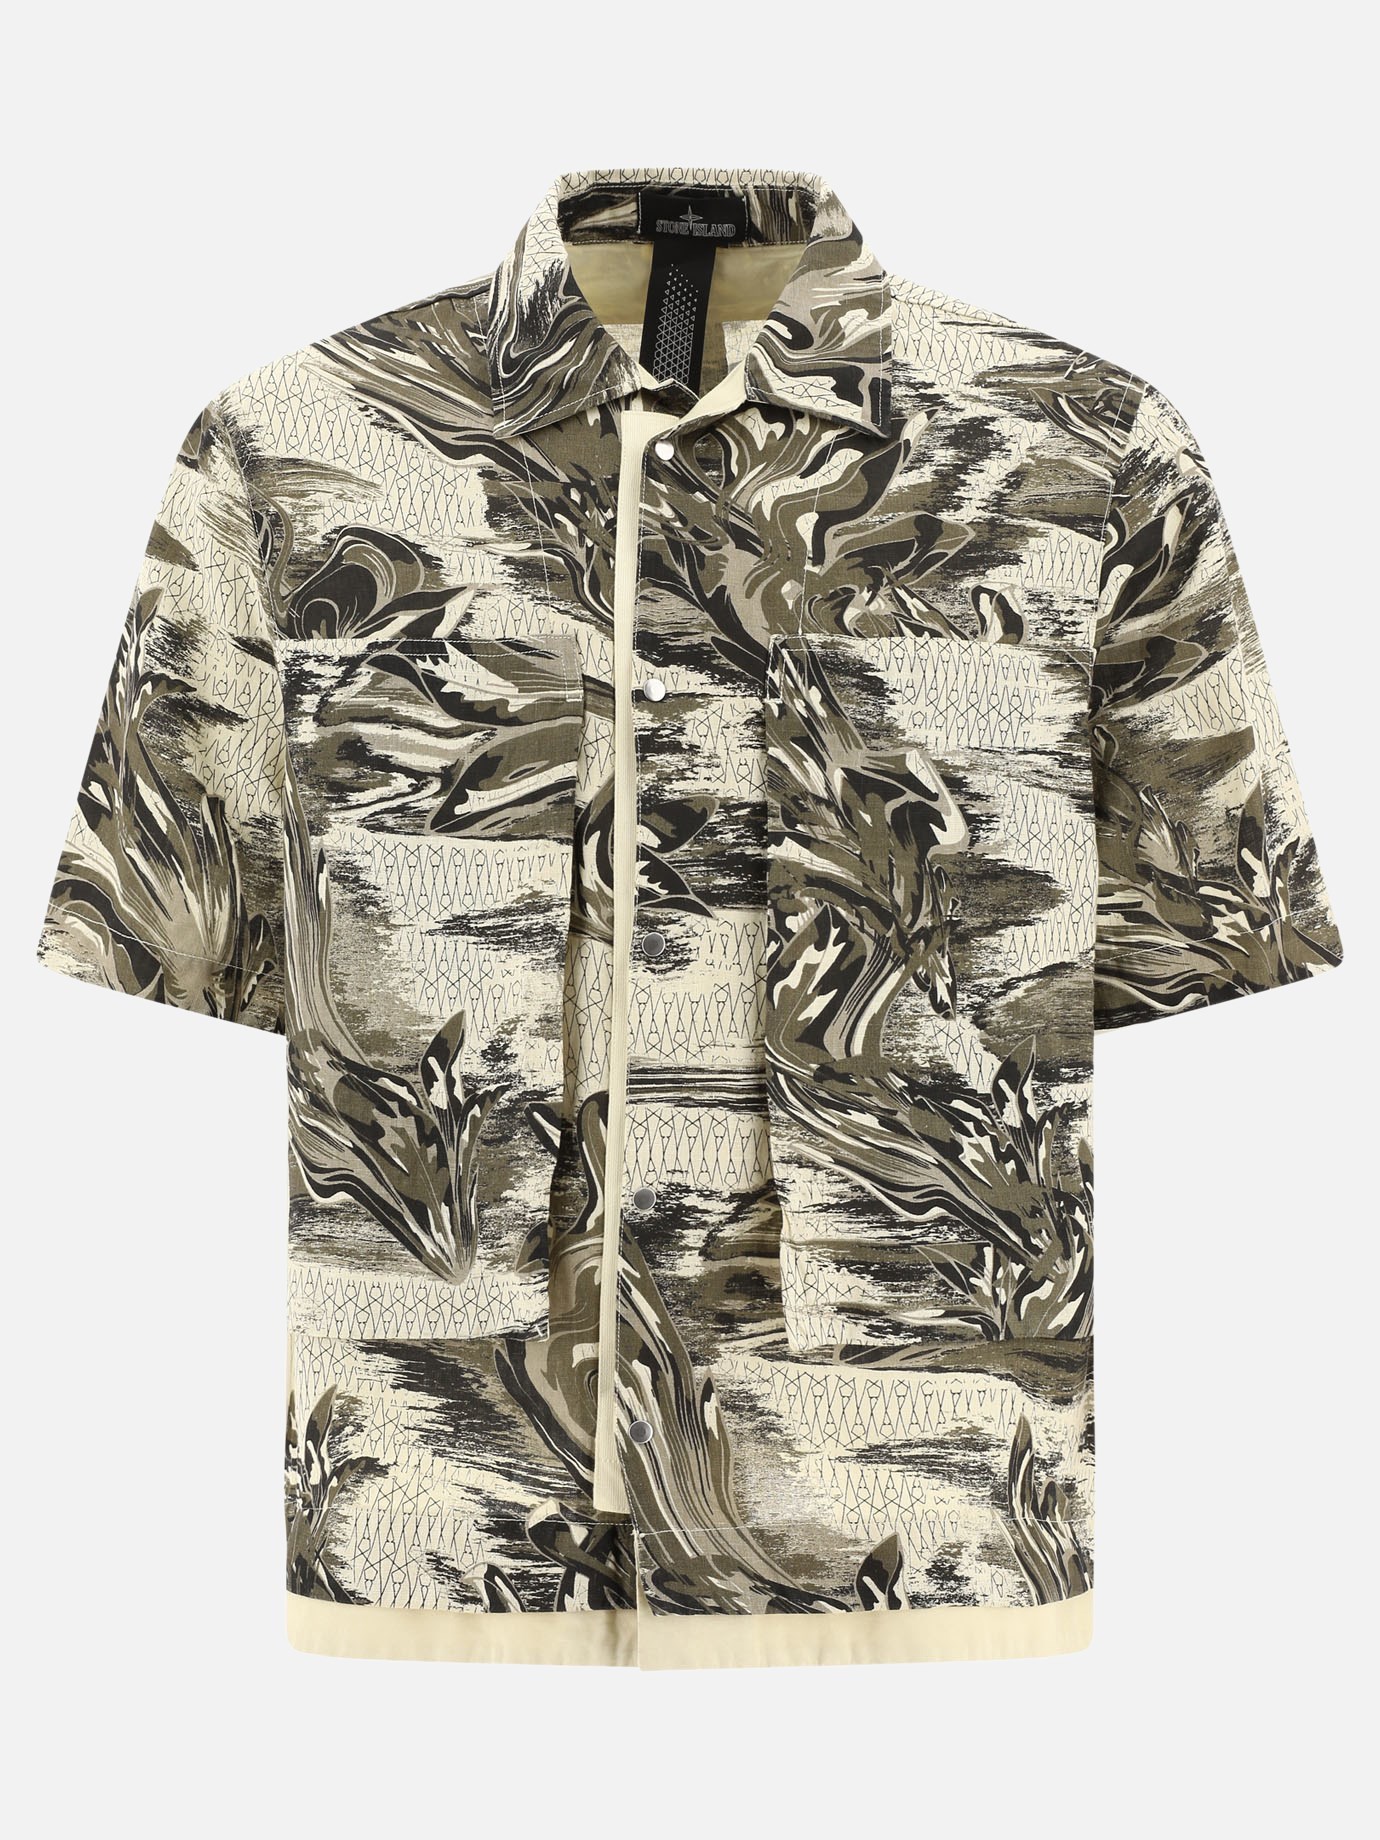 All-over shirtby Stone Island Shadow Project - 3